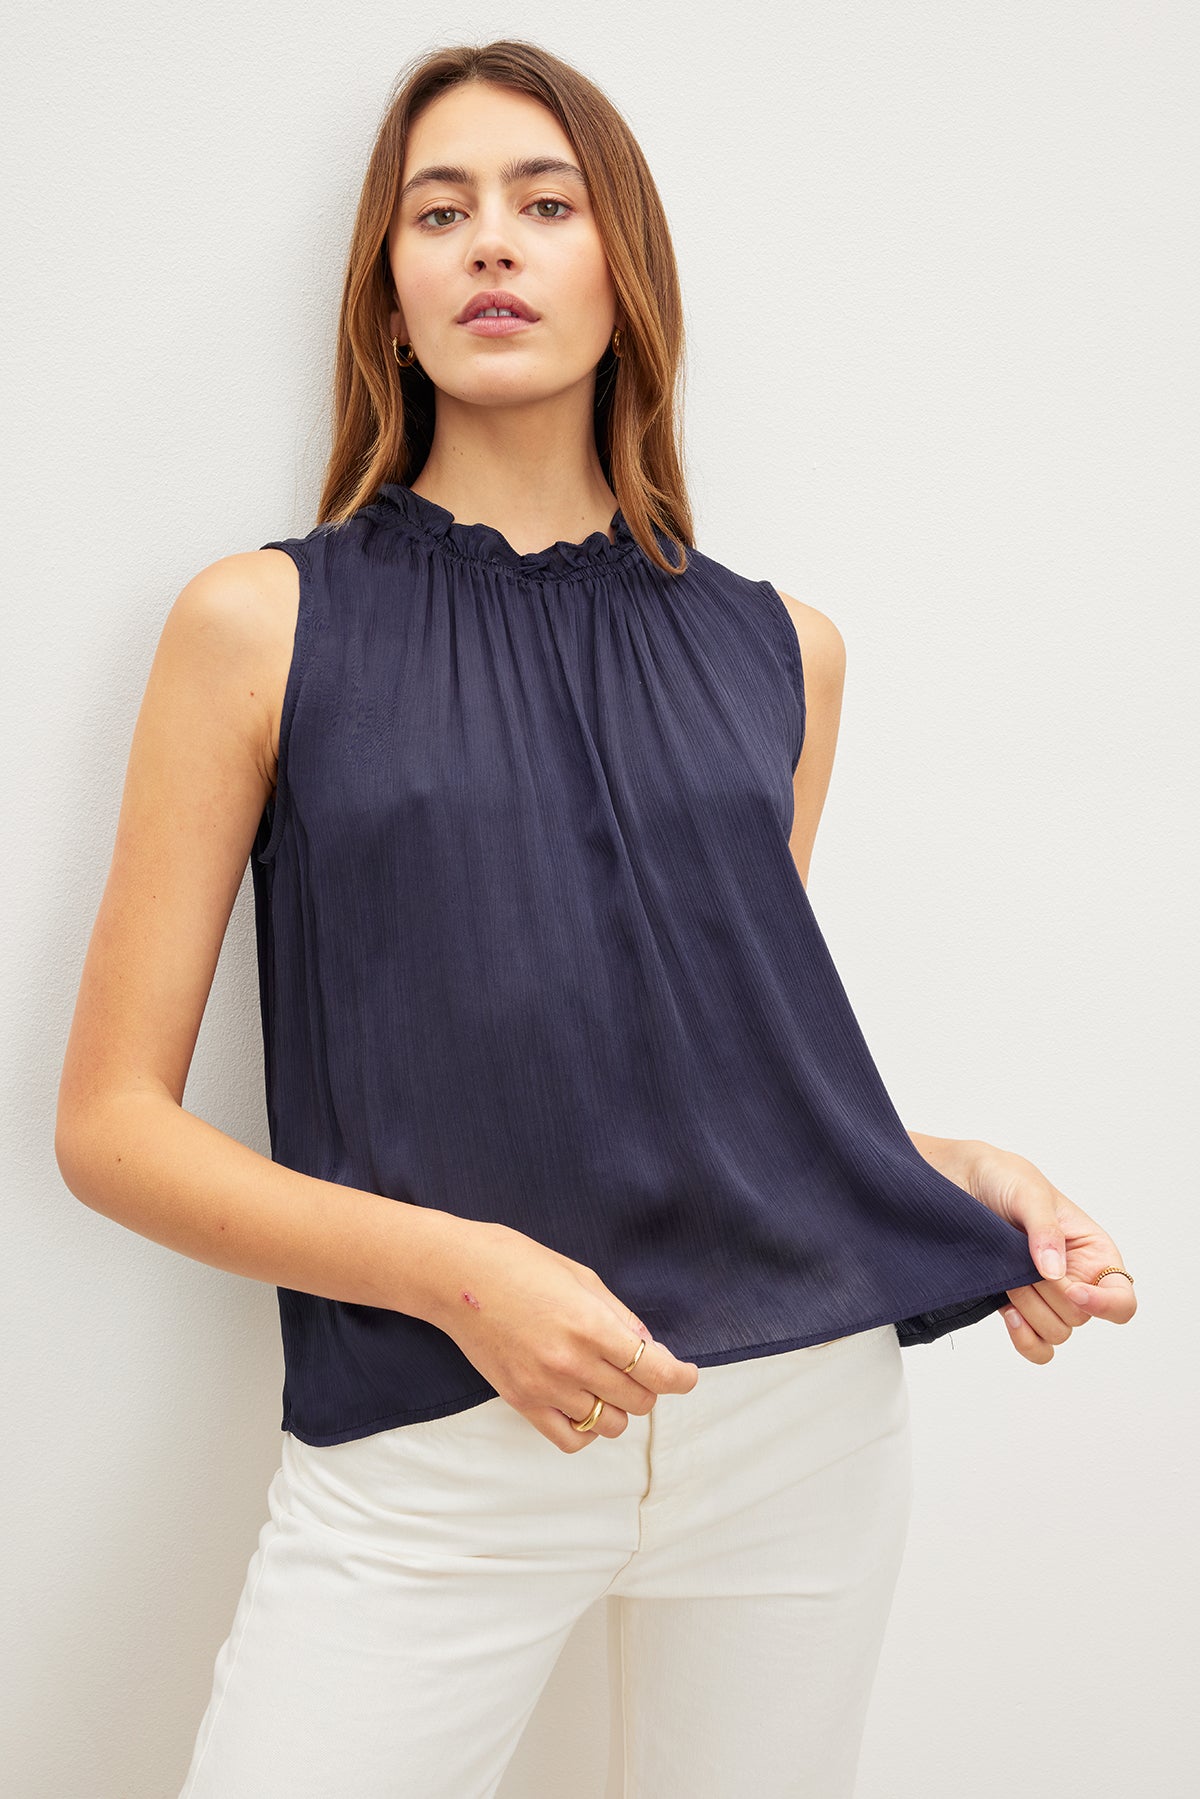 Woman in a navy blue KIANA RUFFLE NECK TANK TOP by Velvet by Graham & Spencer and white pants posing against a light background.-36409583632577